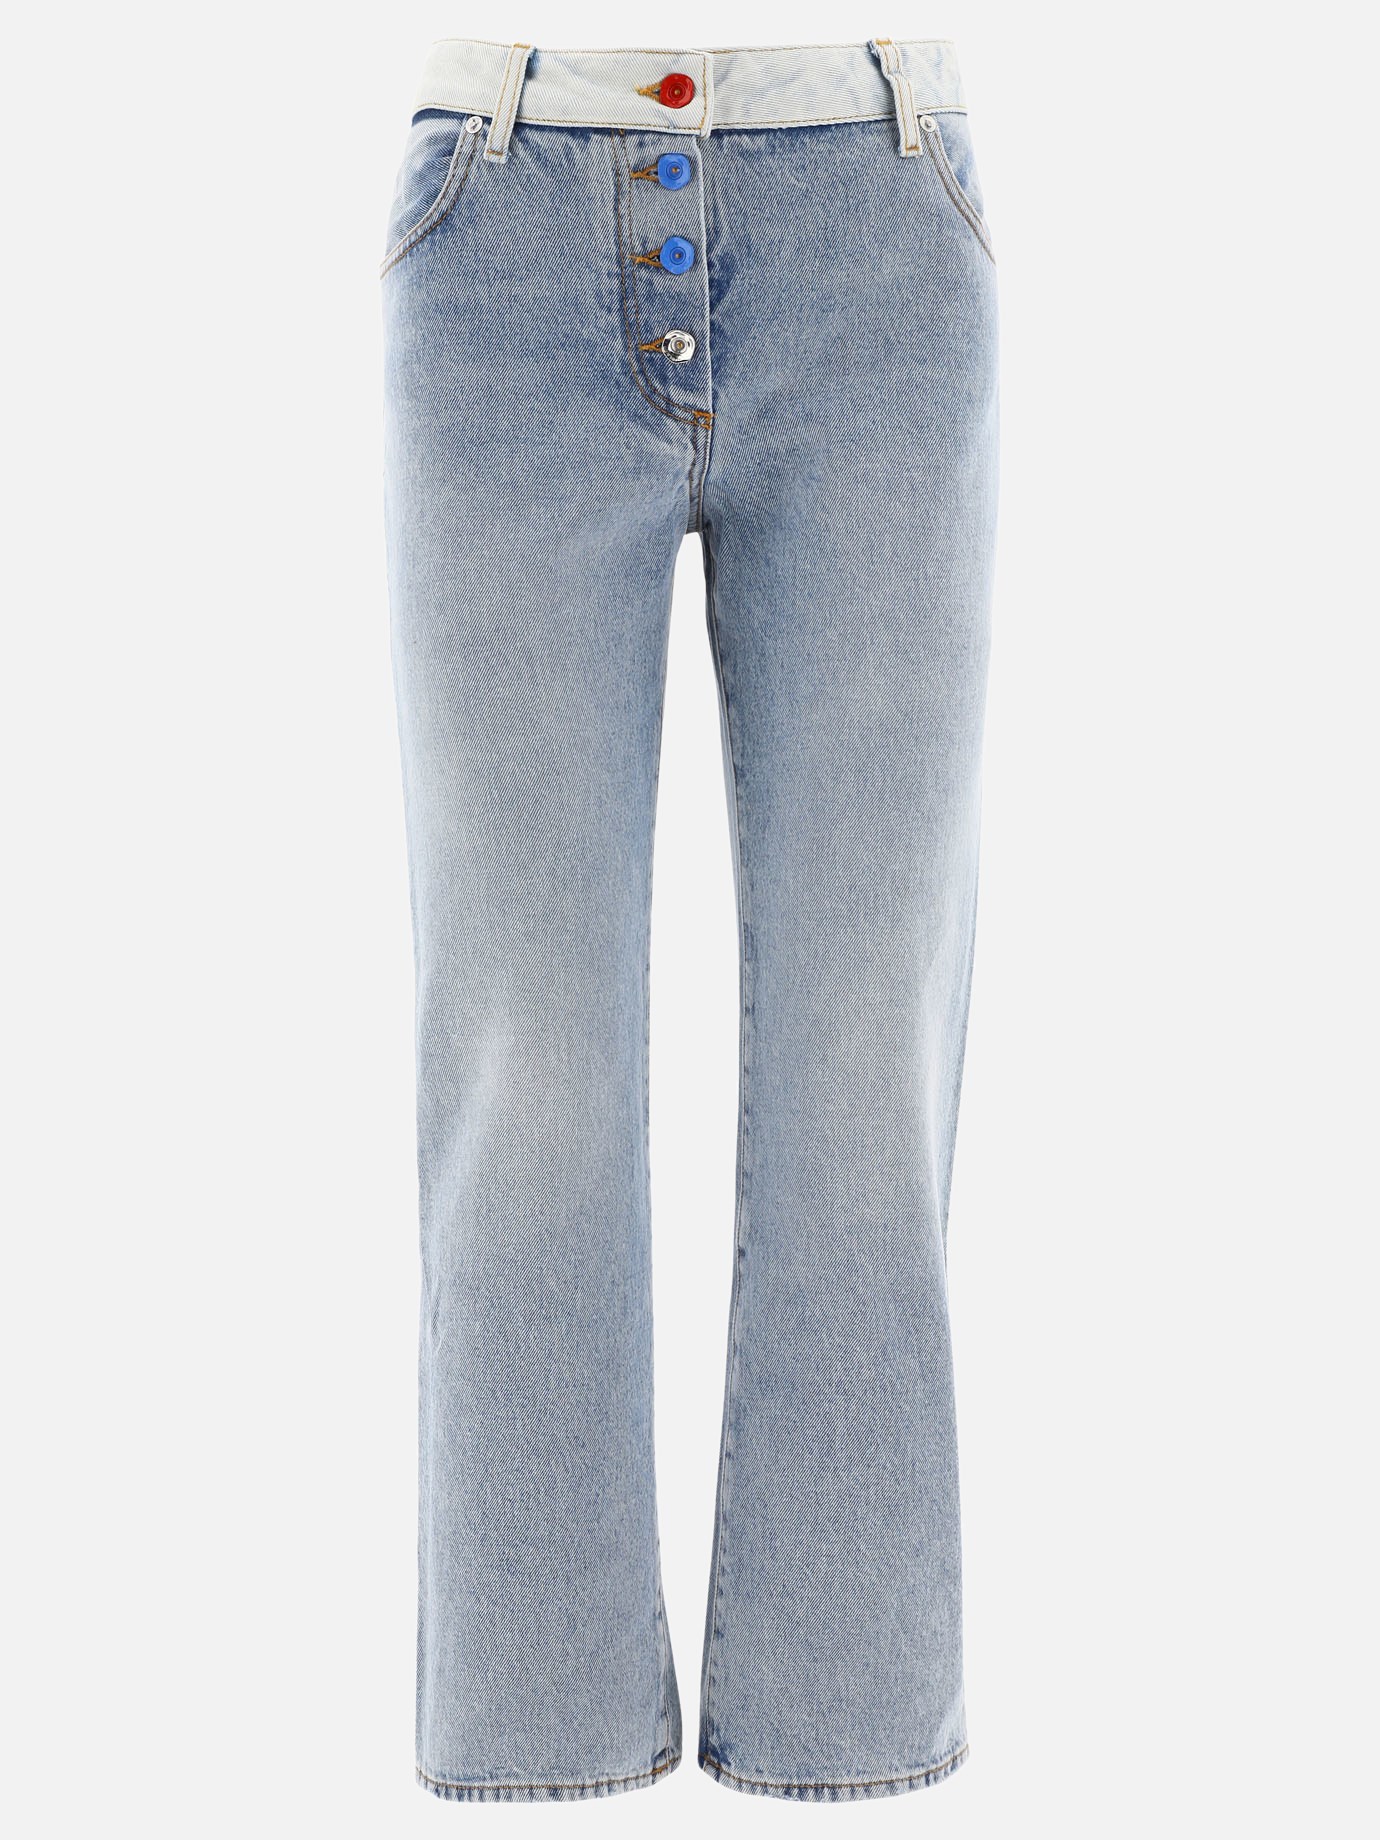 Flared jeans with buttons